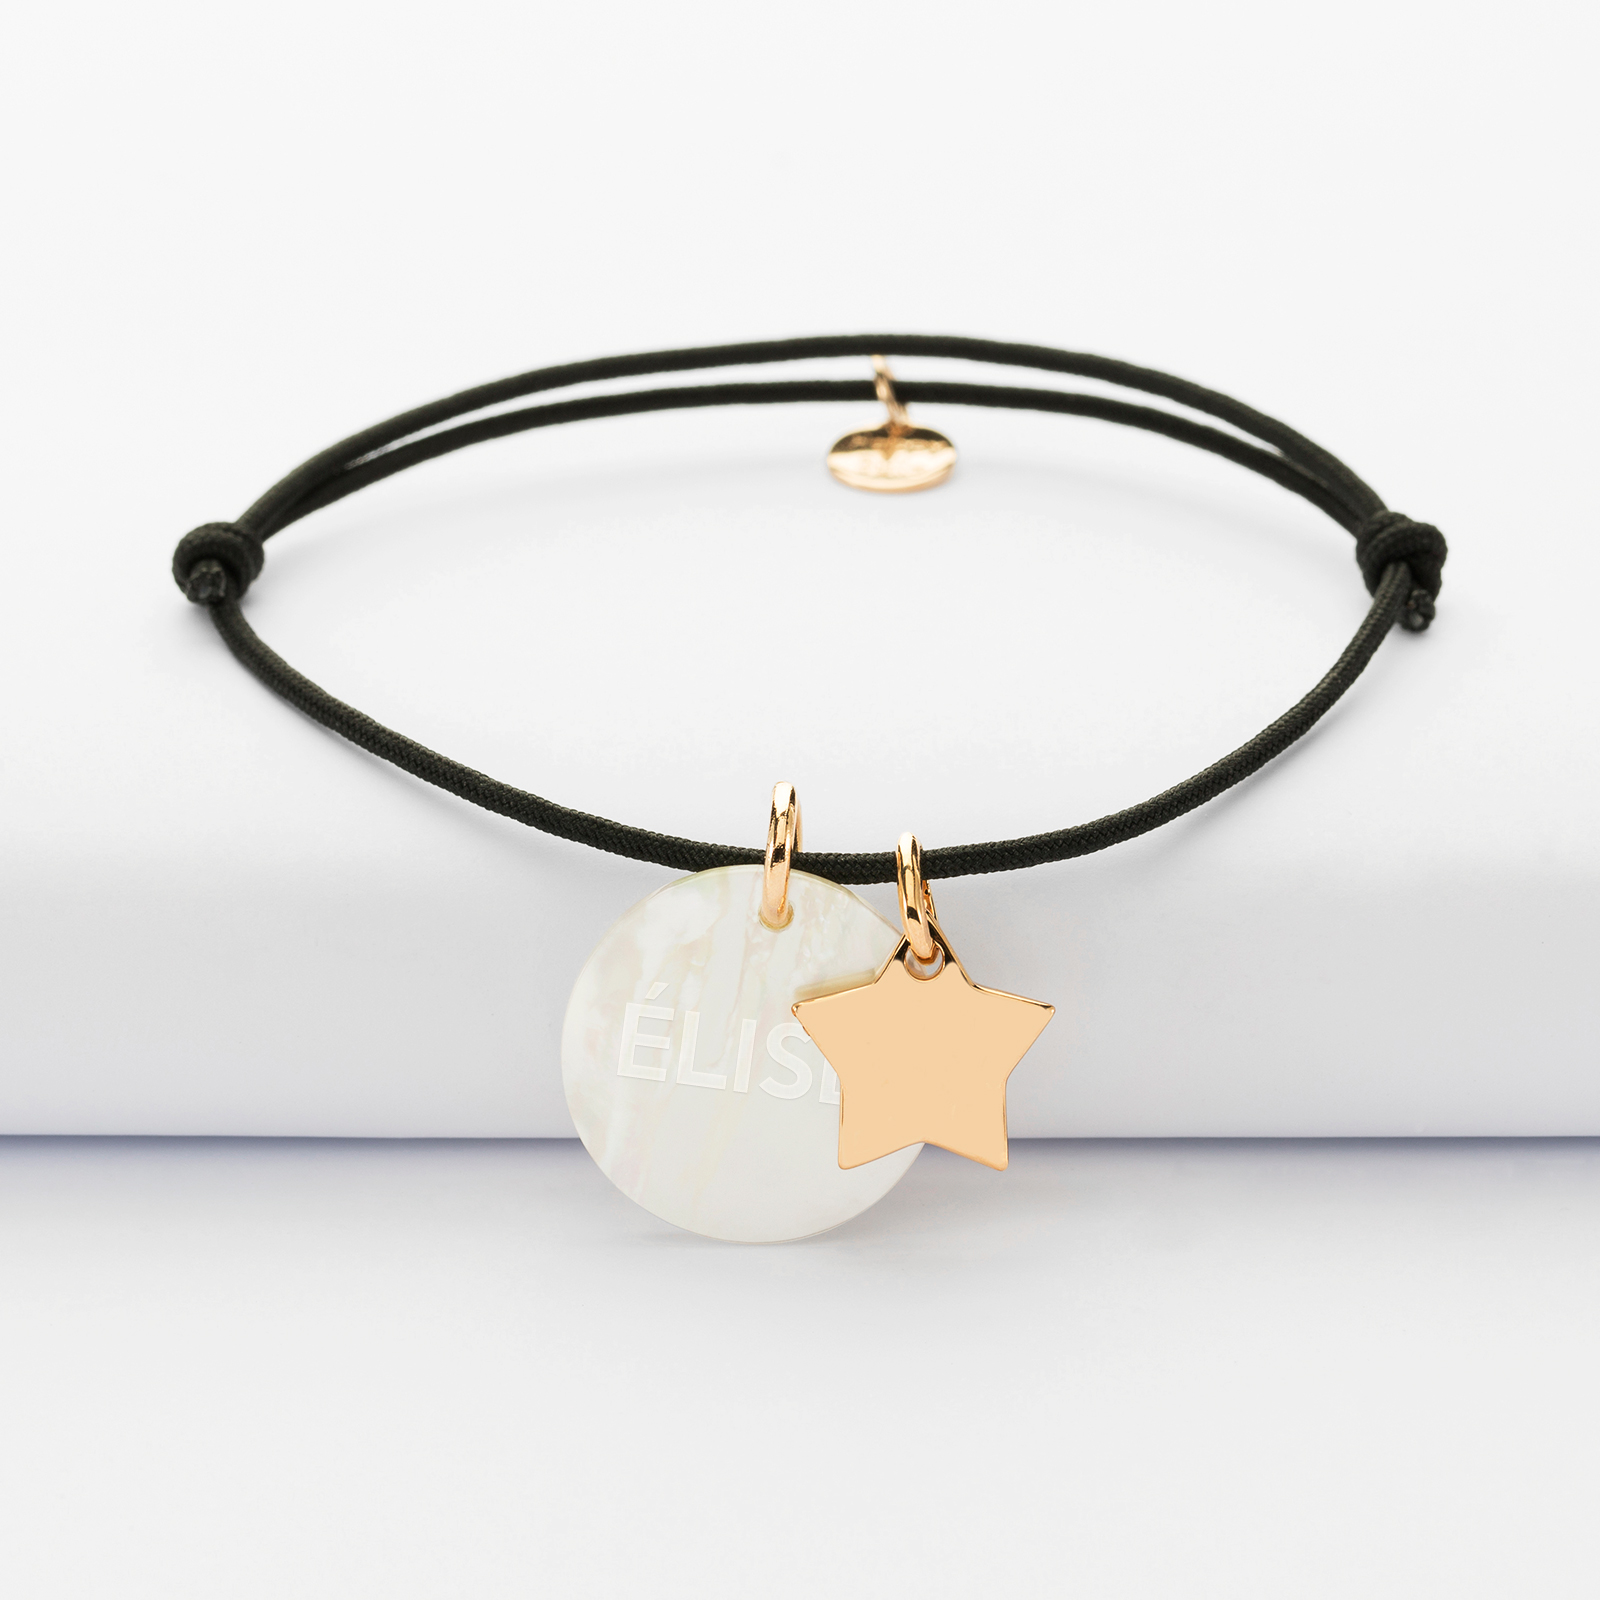 Personalised engraved mother-of-pearl medallion cord bracelet 19 mm and gold-plated star charm 12 mm - name